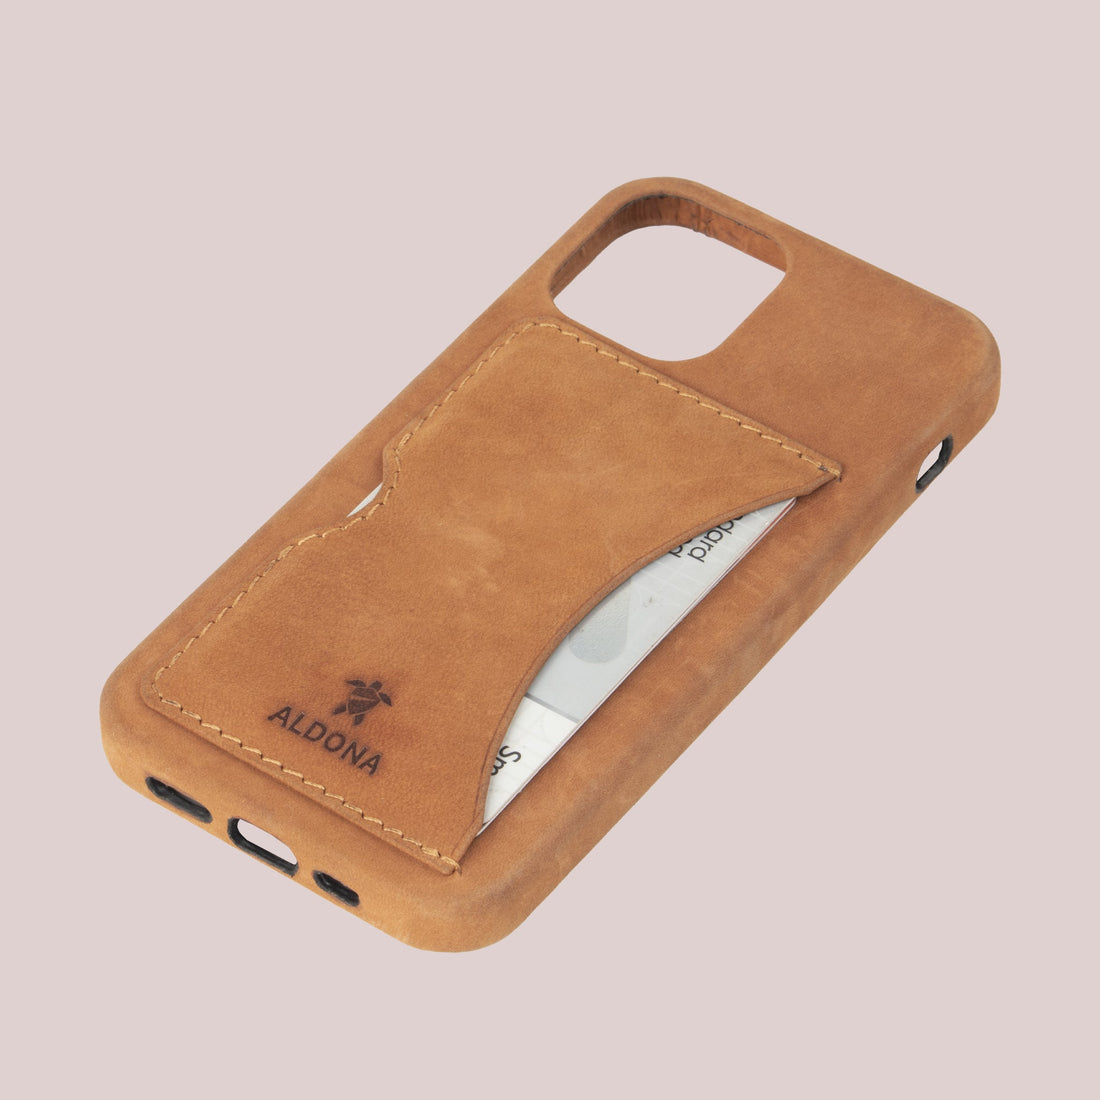 Baxter Card Case for iPhone 13 Pro Max - Vintage Tan